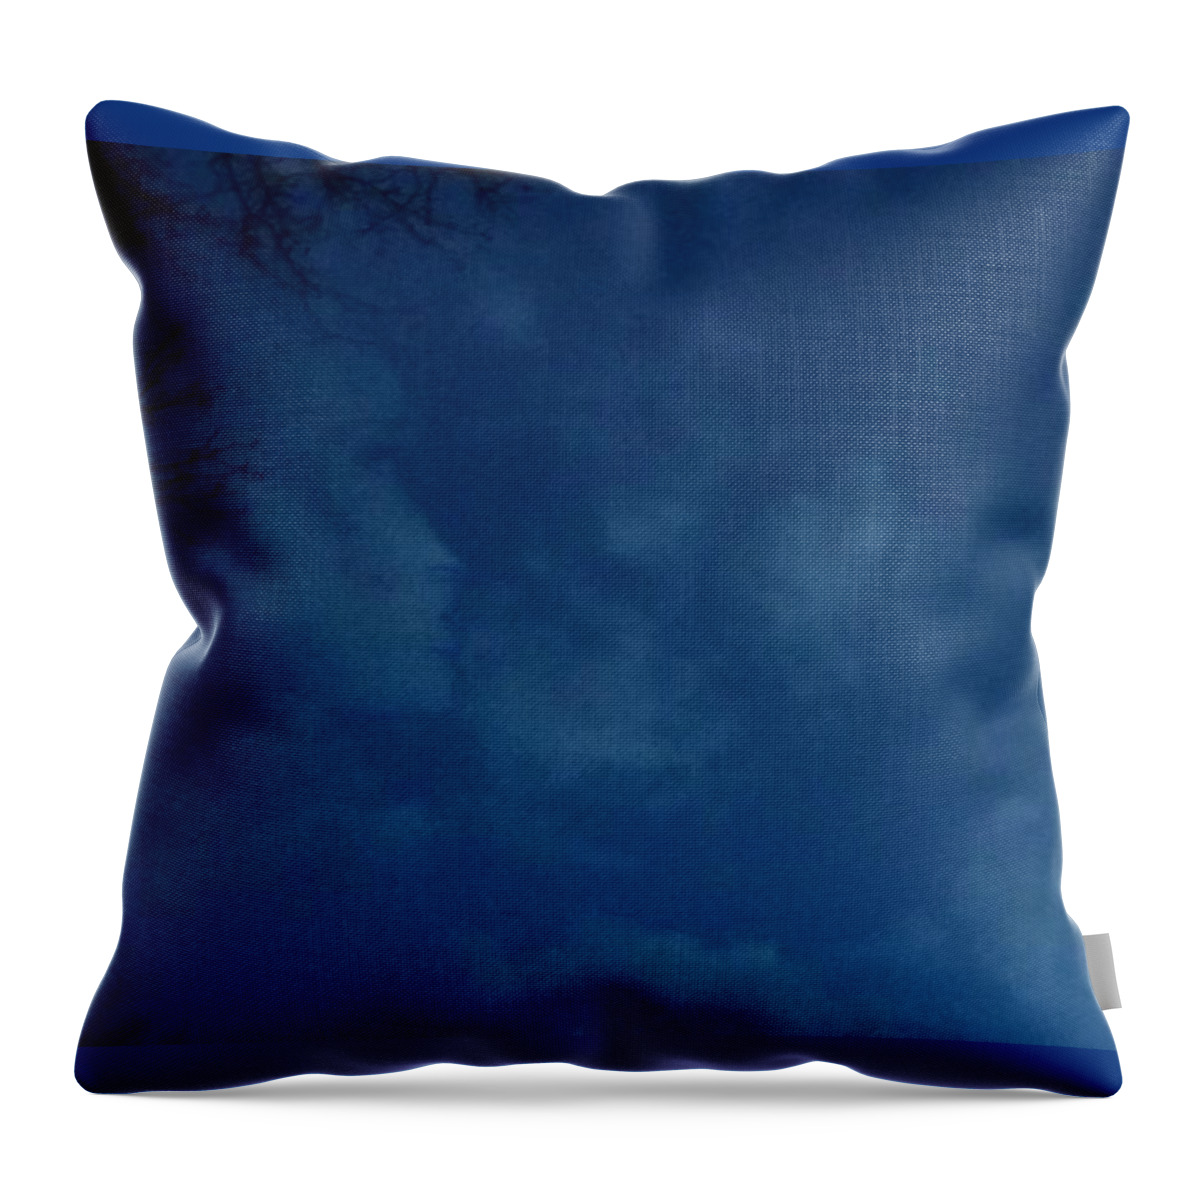 Angel Throw Pillow featuring the photograph Holding You In Heaven by Diamante Lavendar